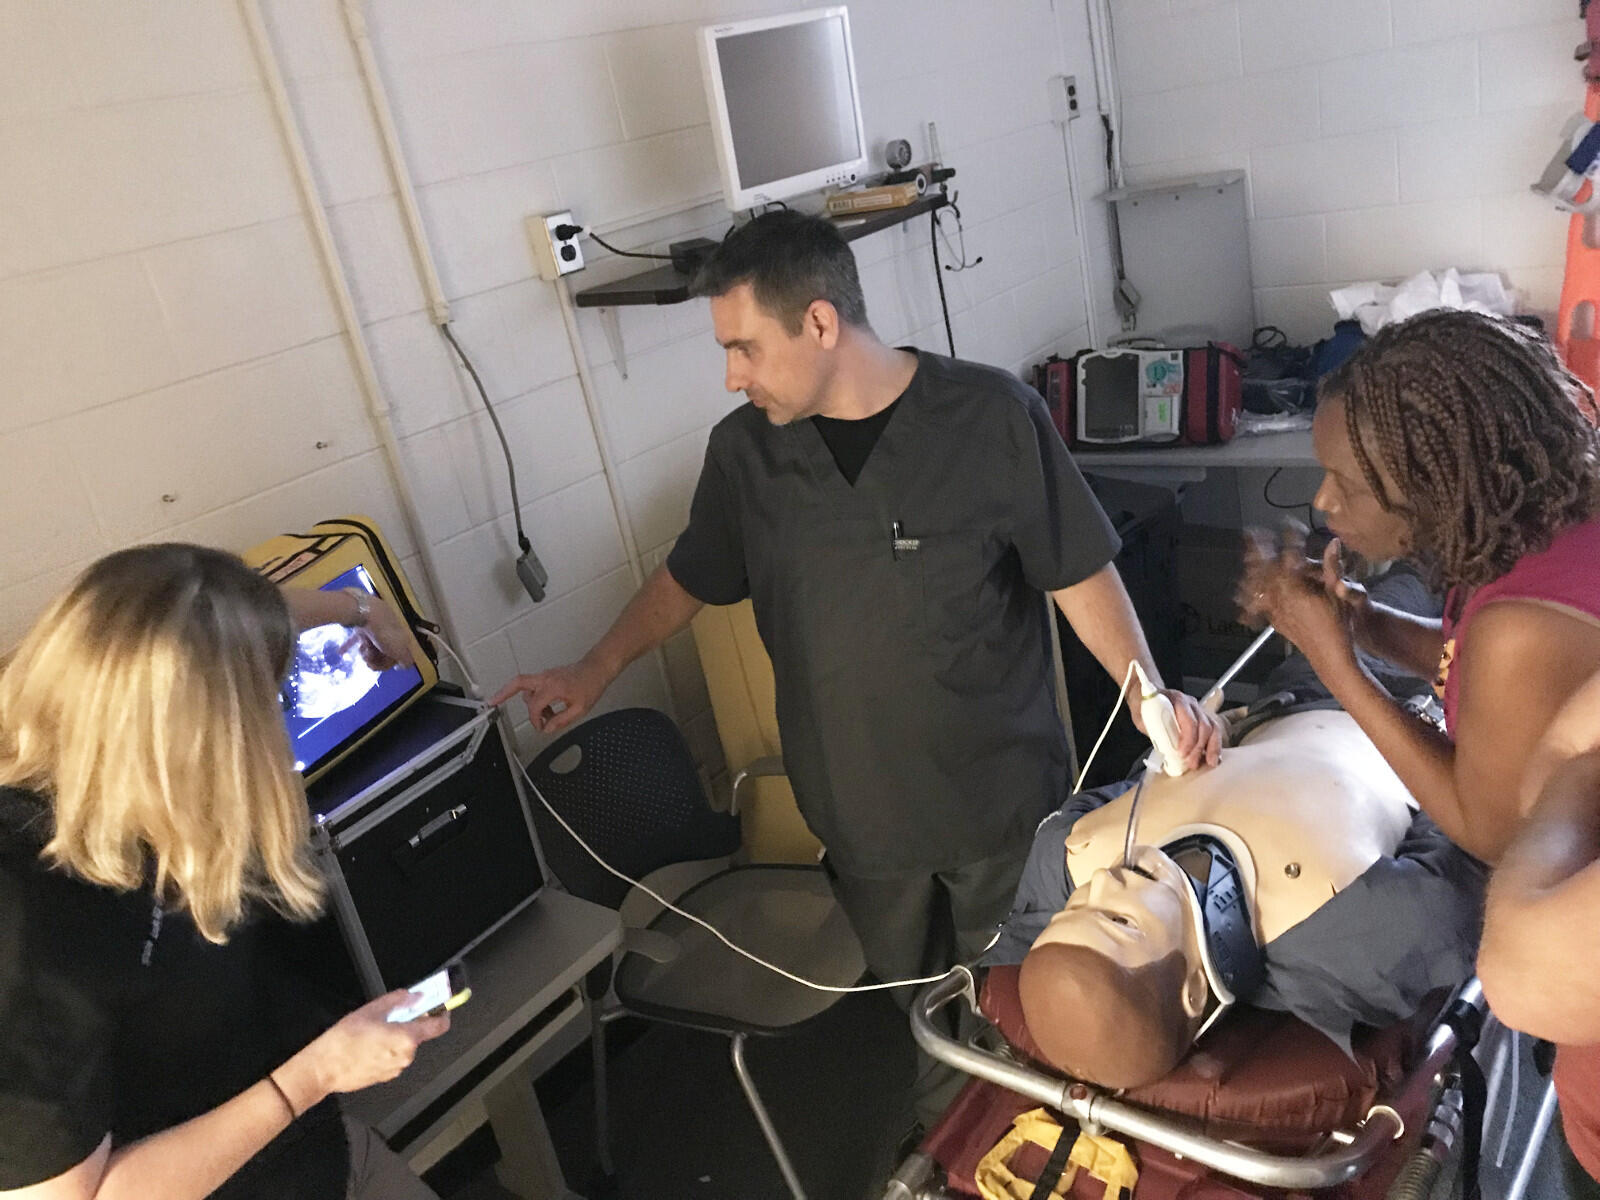 Shawn Lawrence, a paramedic, uses ultrasound on a dummy as part of a simulated exercise to diagnose the condition of a 62-year-old male who collapsed at a gym.

